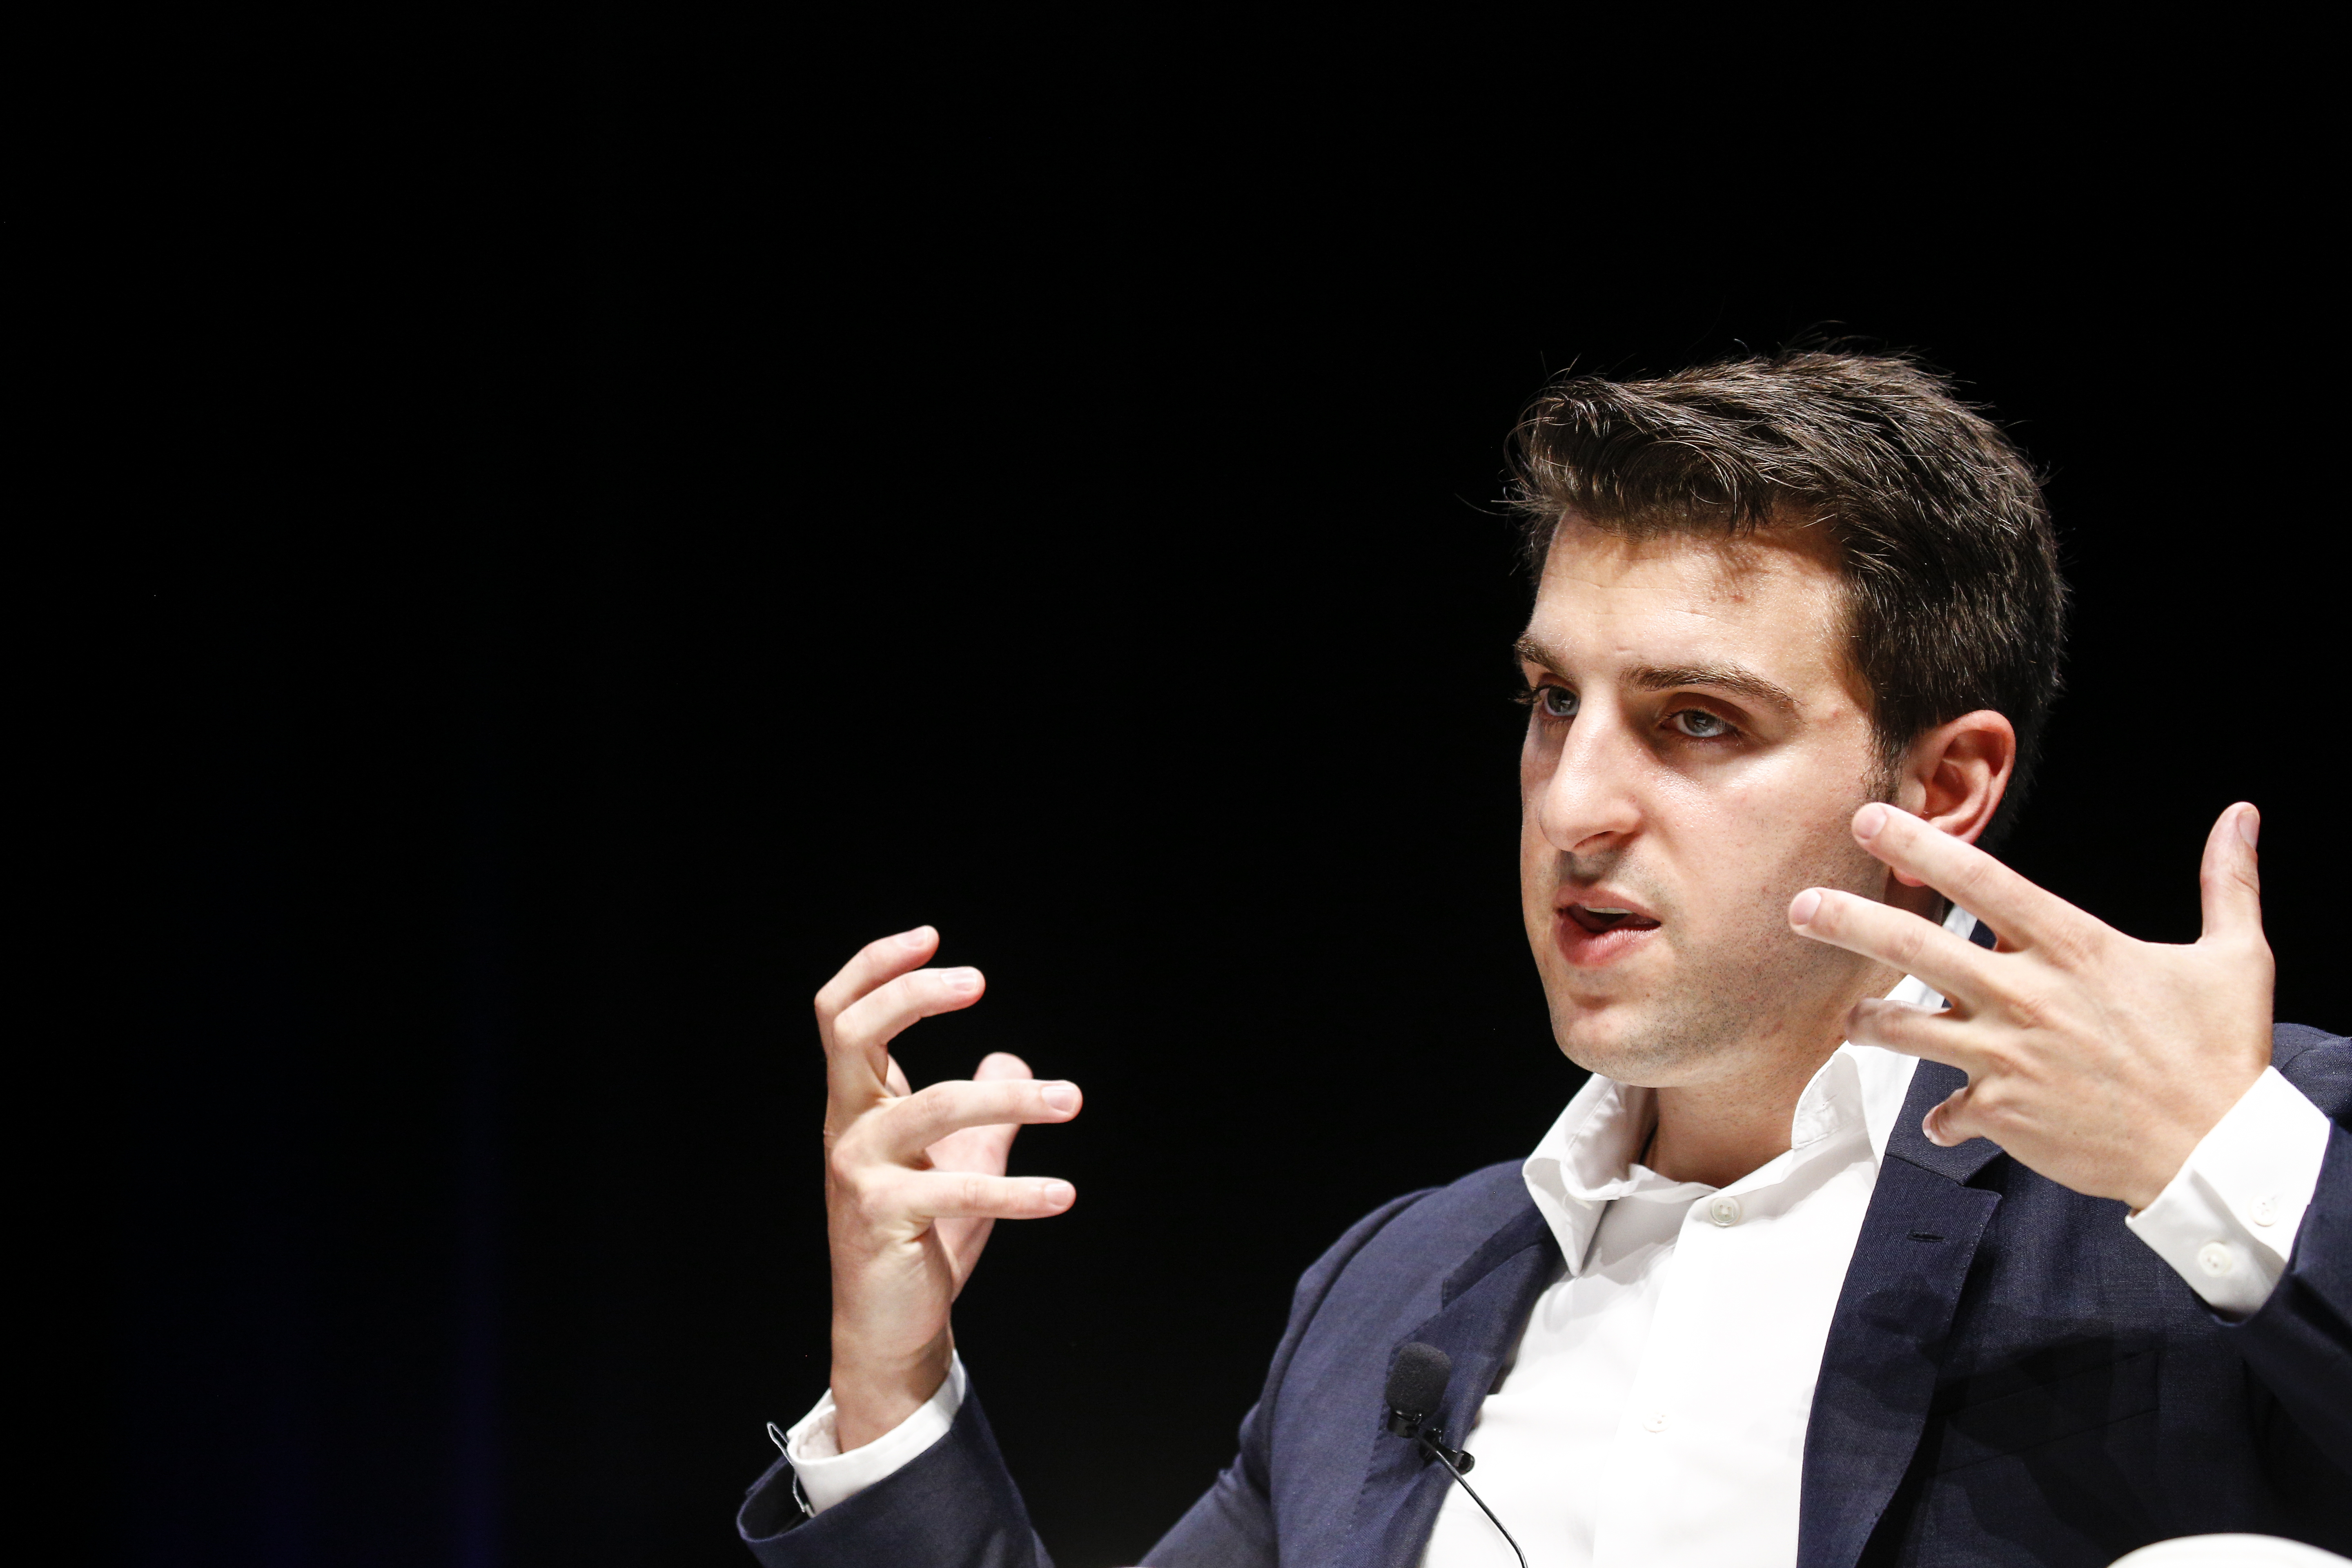 Brian Chesky at The Cannes Lions 2016 on June 20, 2016.